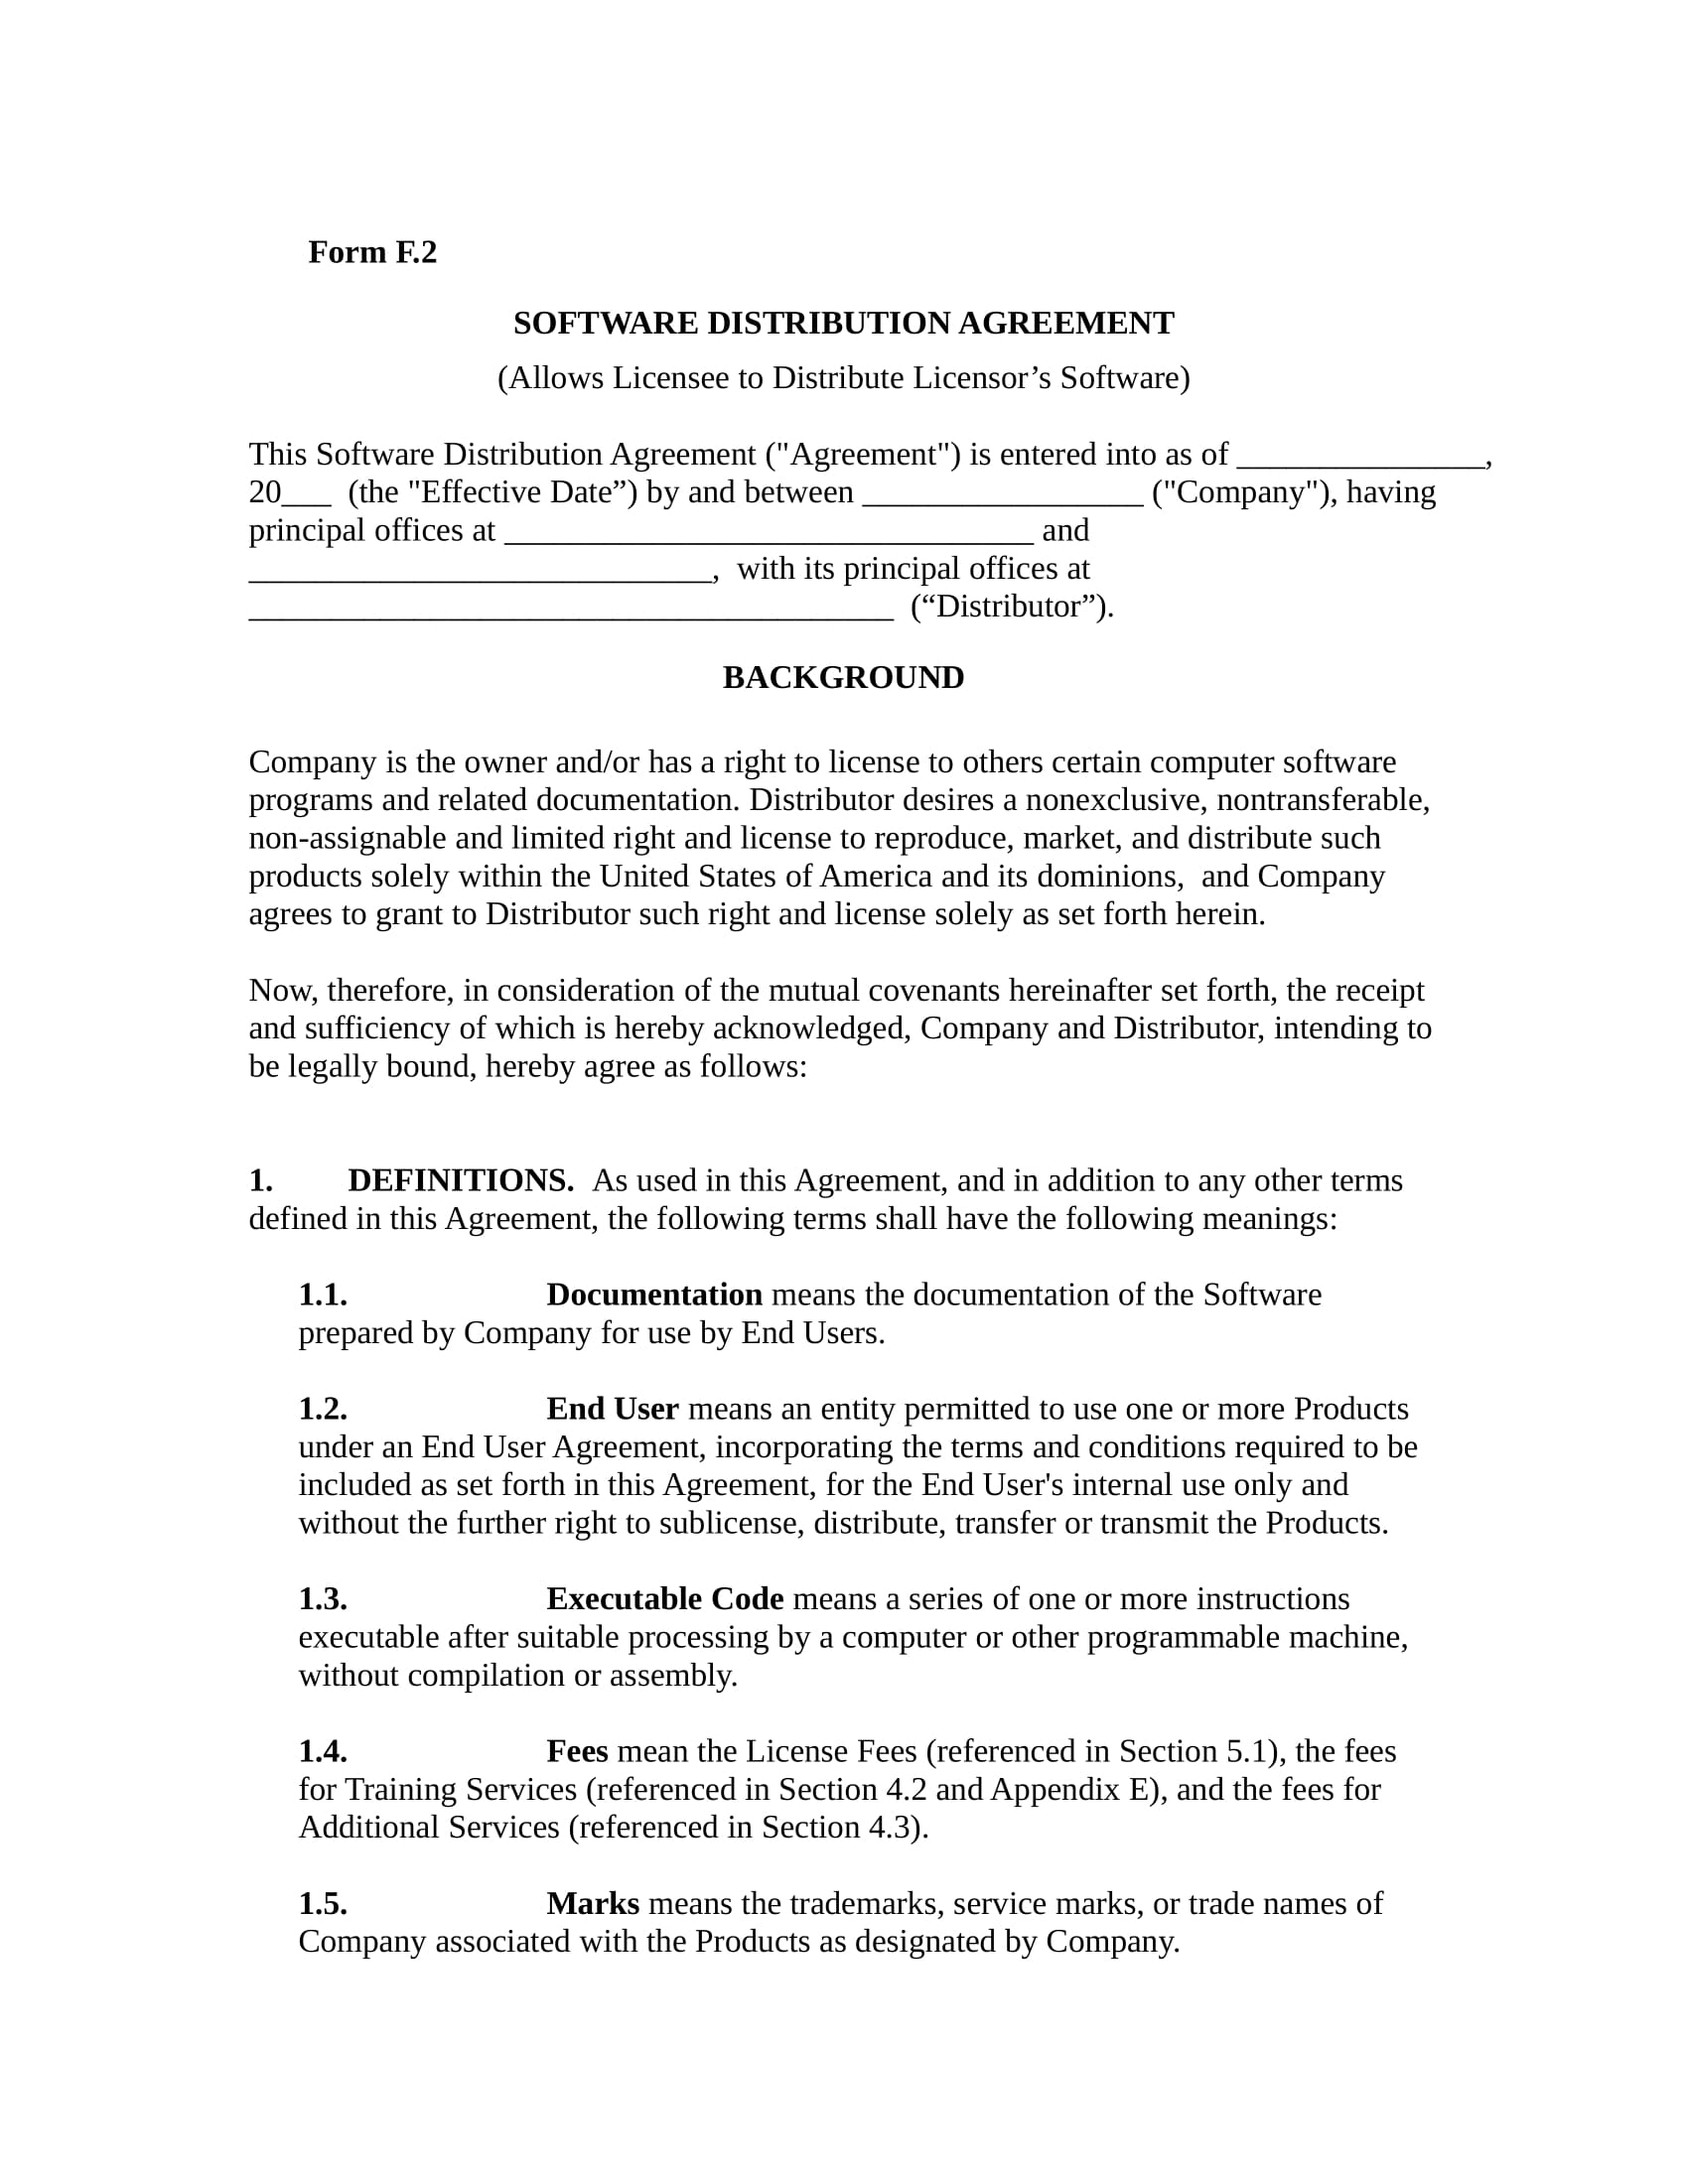 FREE 9+ Distributorship Agreement Contract Forms in PDF ...
